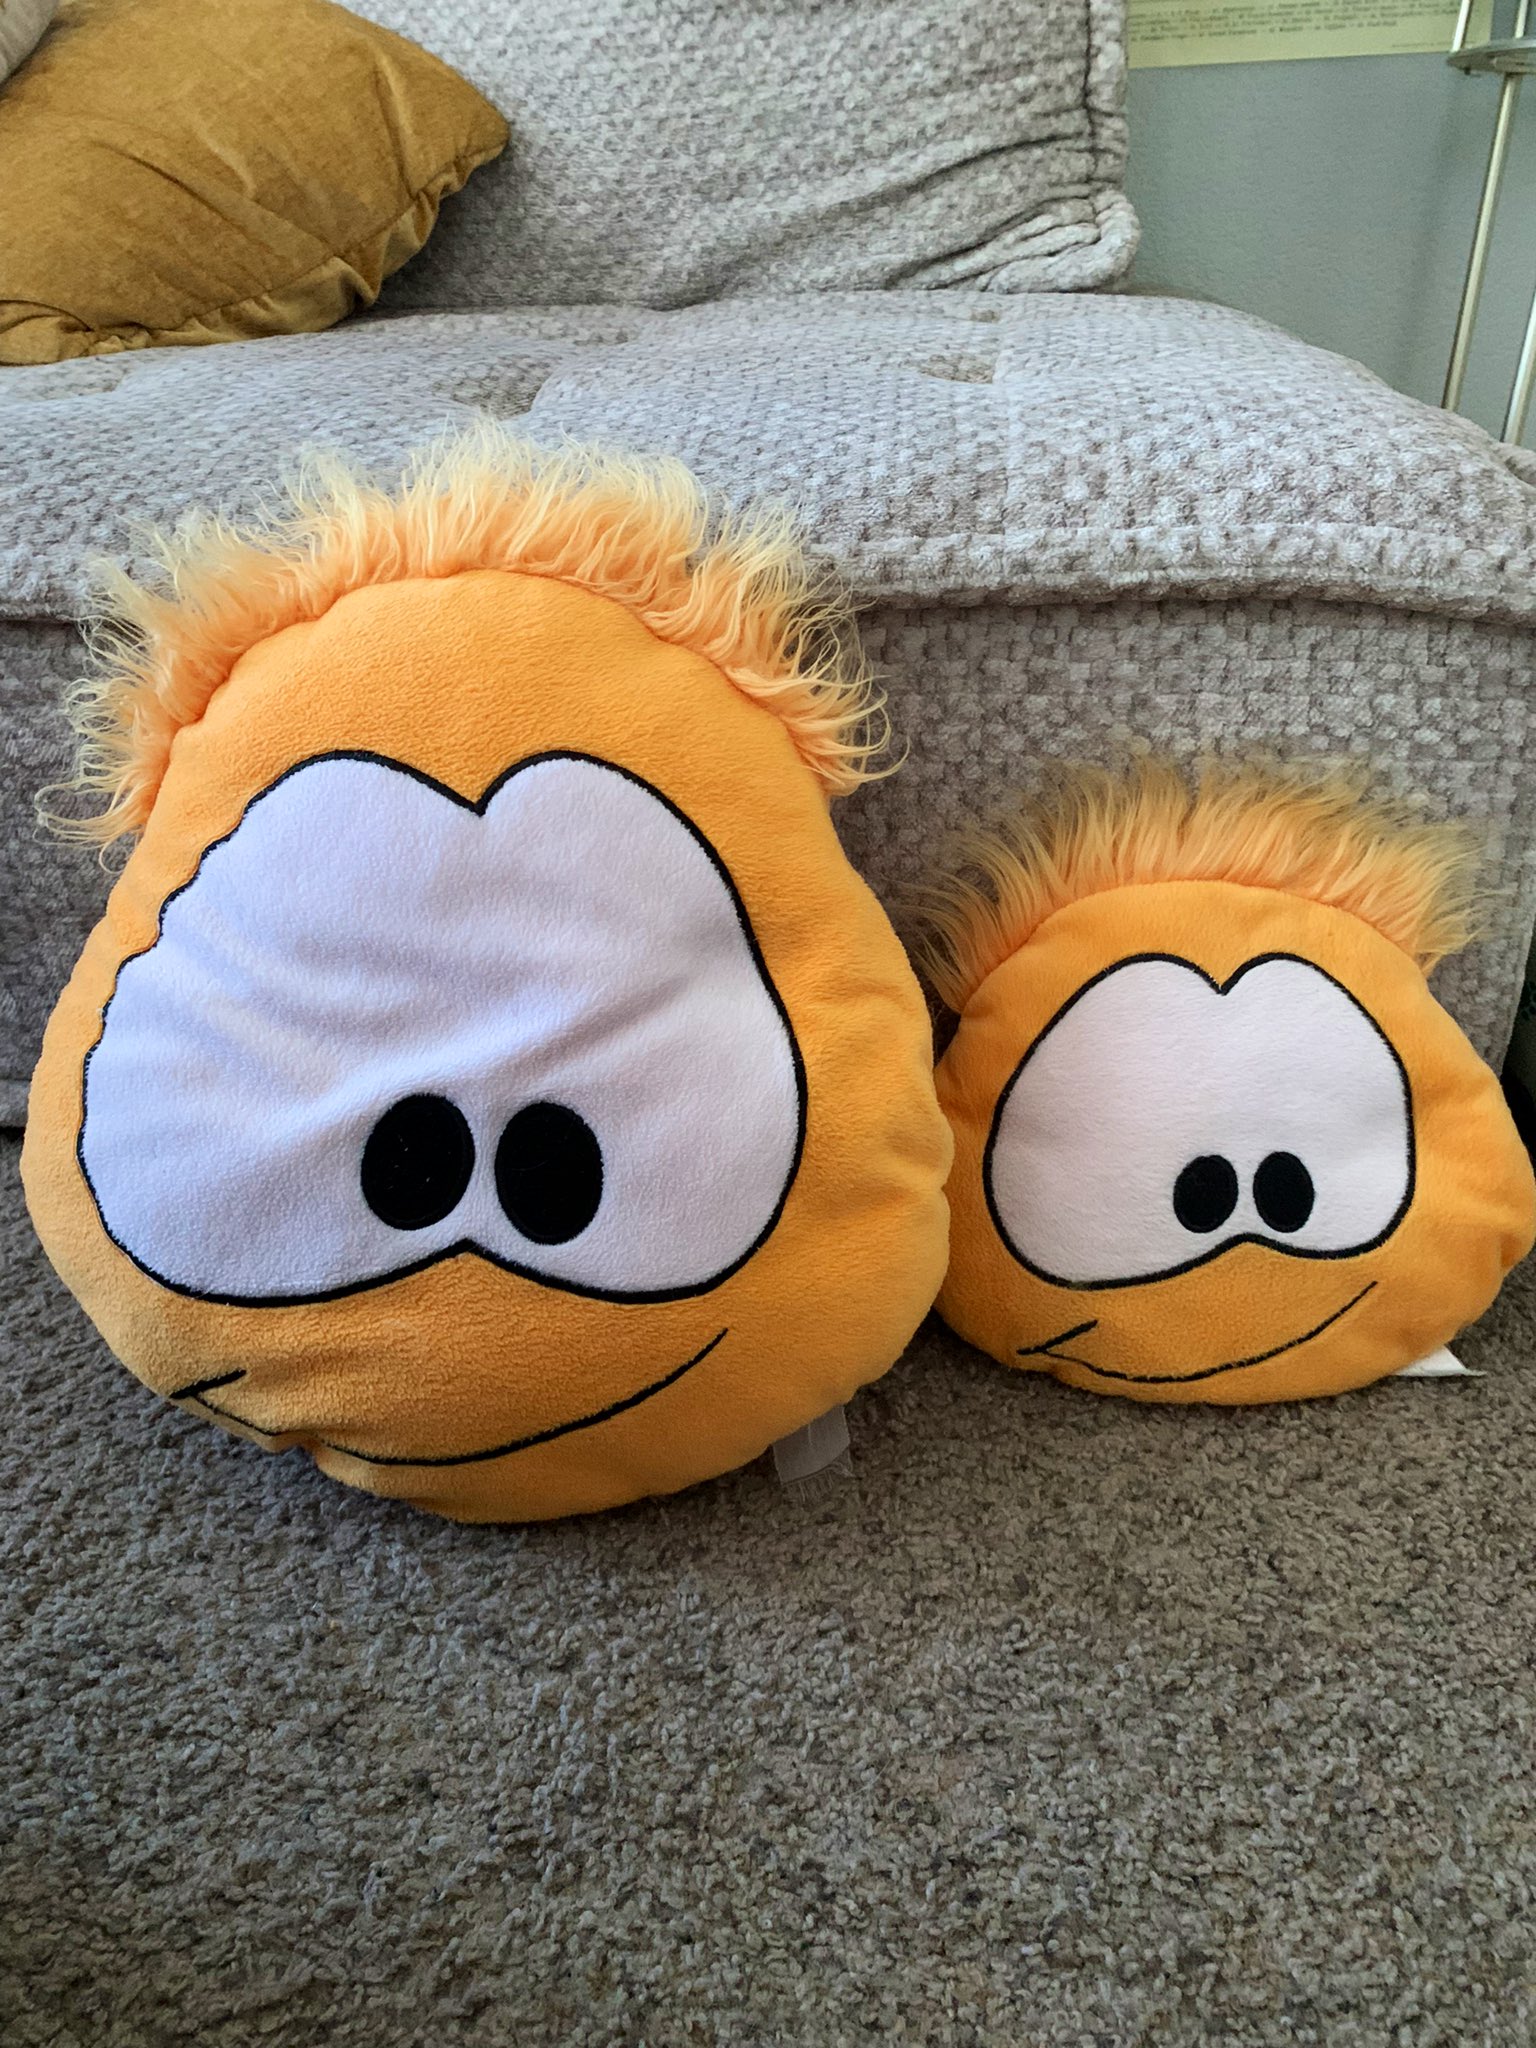 Club Penguin Gif WITH ITEM  Club penguin, Penguins, Garfield images